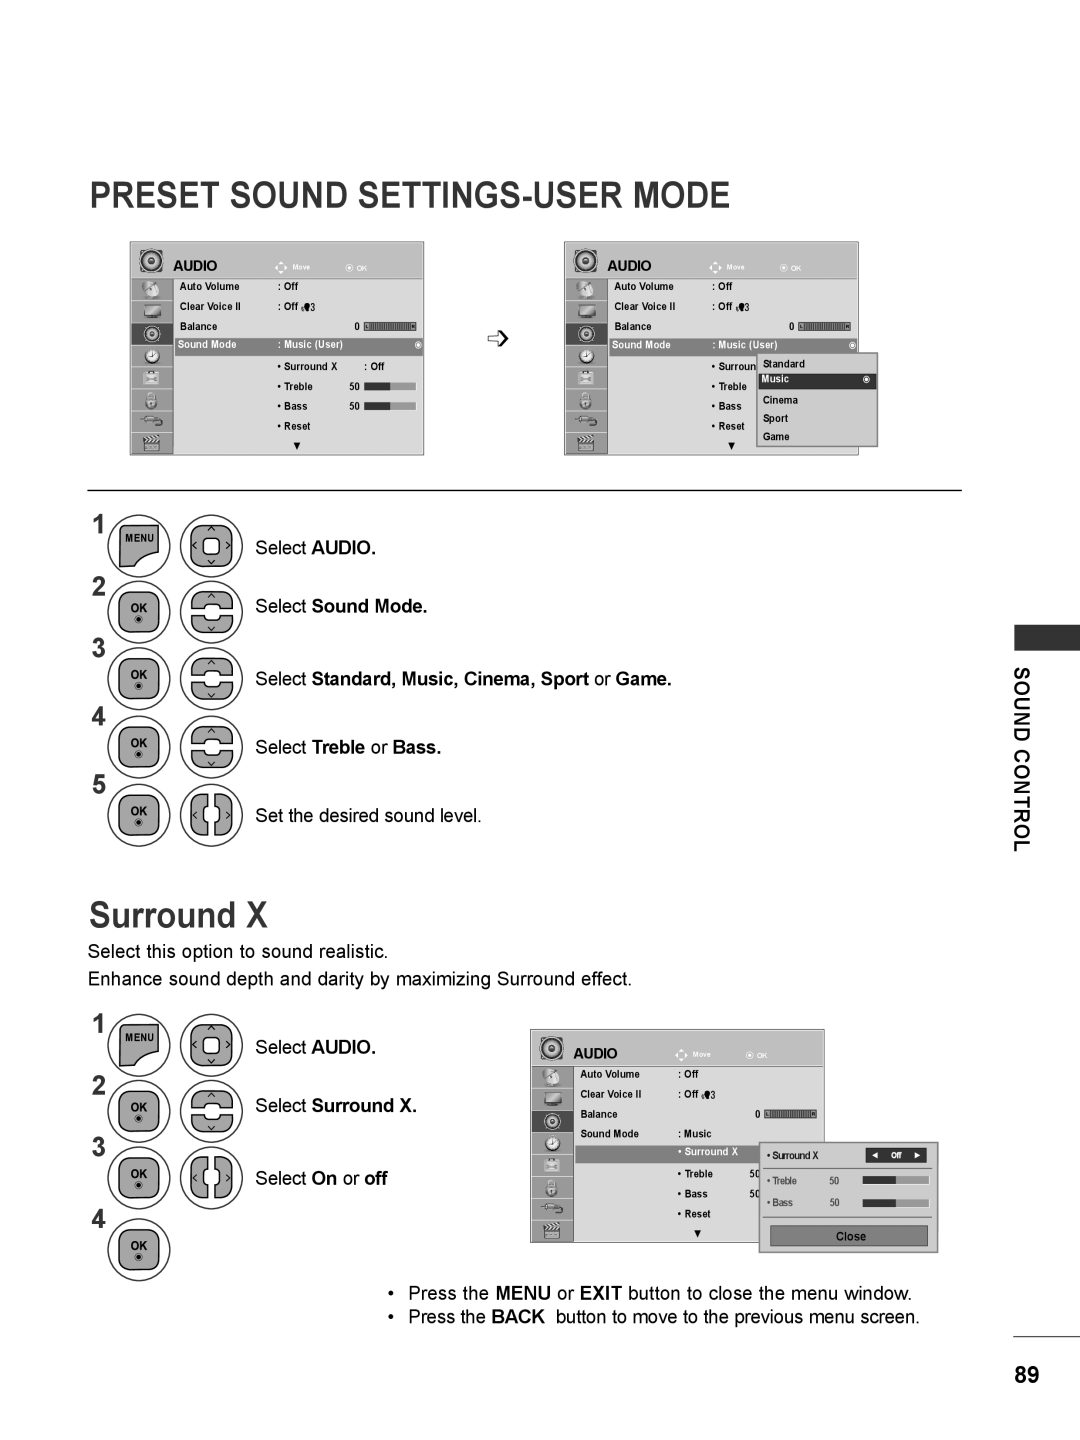 LG Electronics M2080DN, M2780DF Preset Sound Settings-User Mode, Select Treble or Bass, Sound Control, Select Surround 